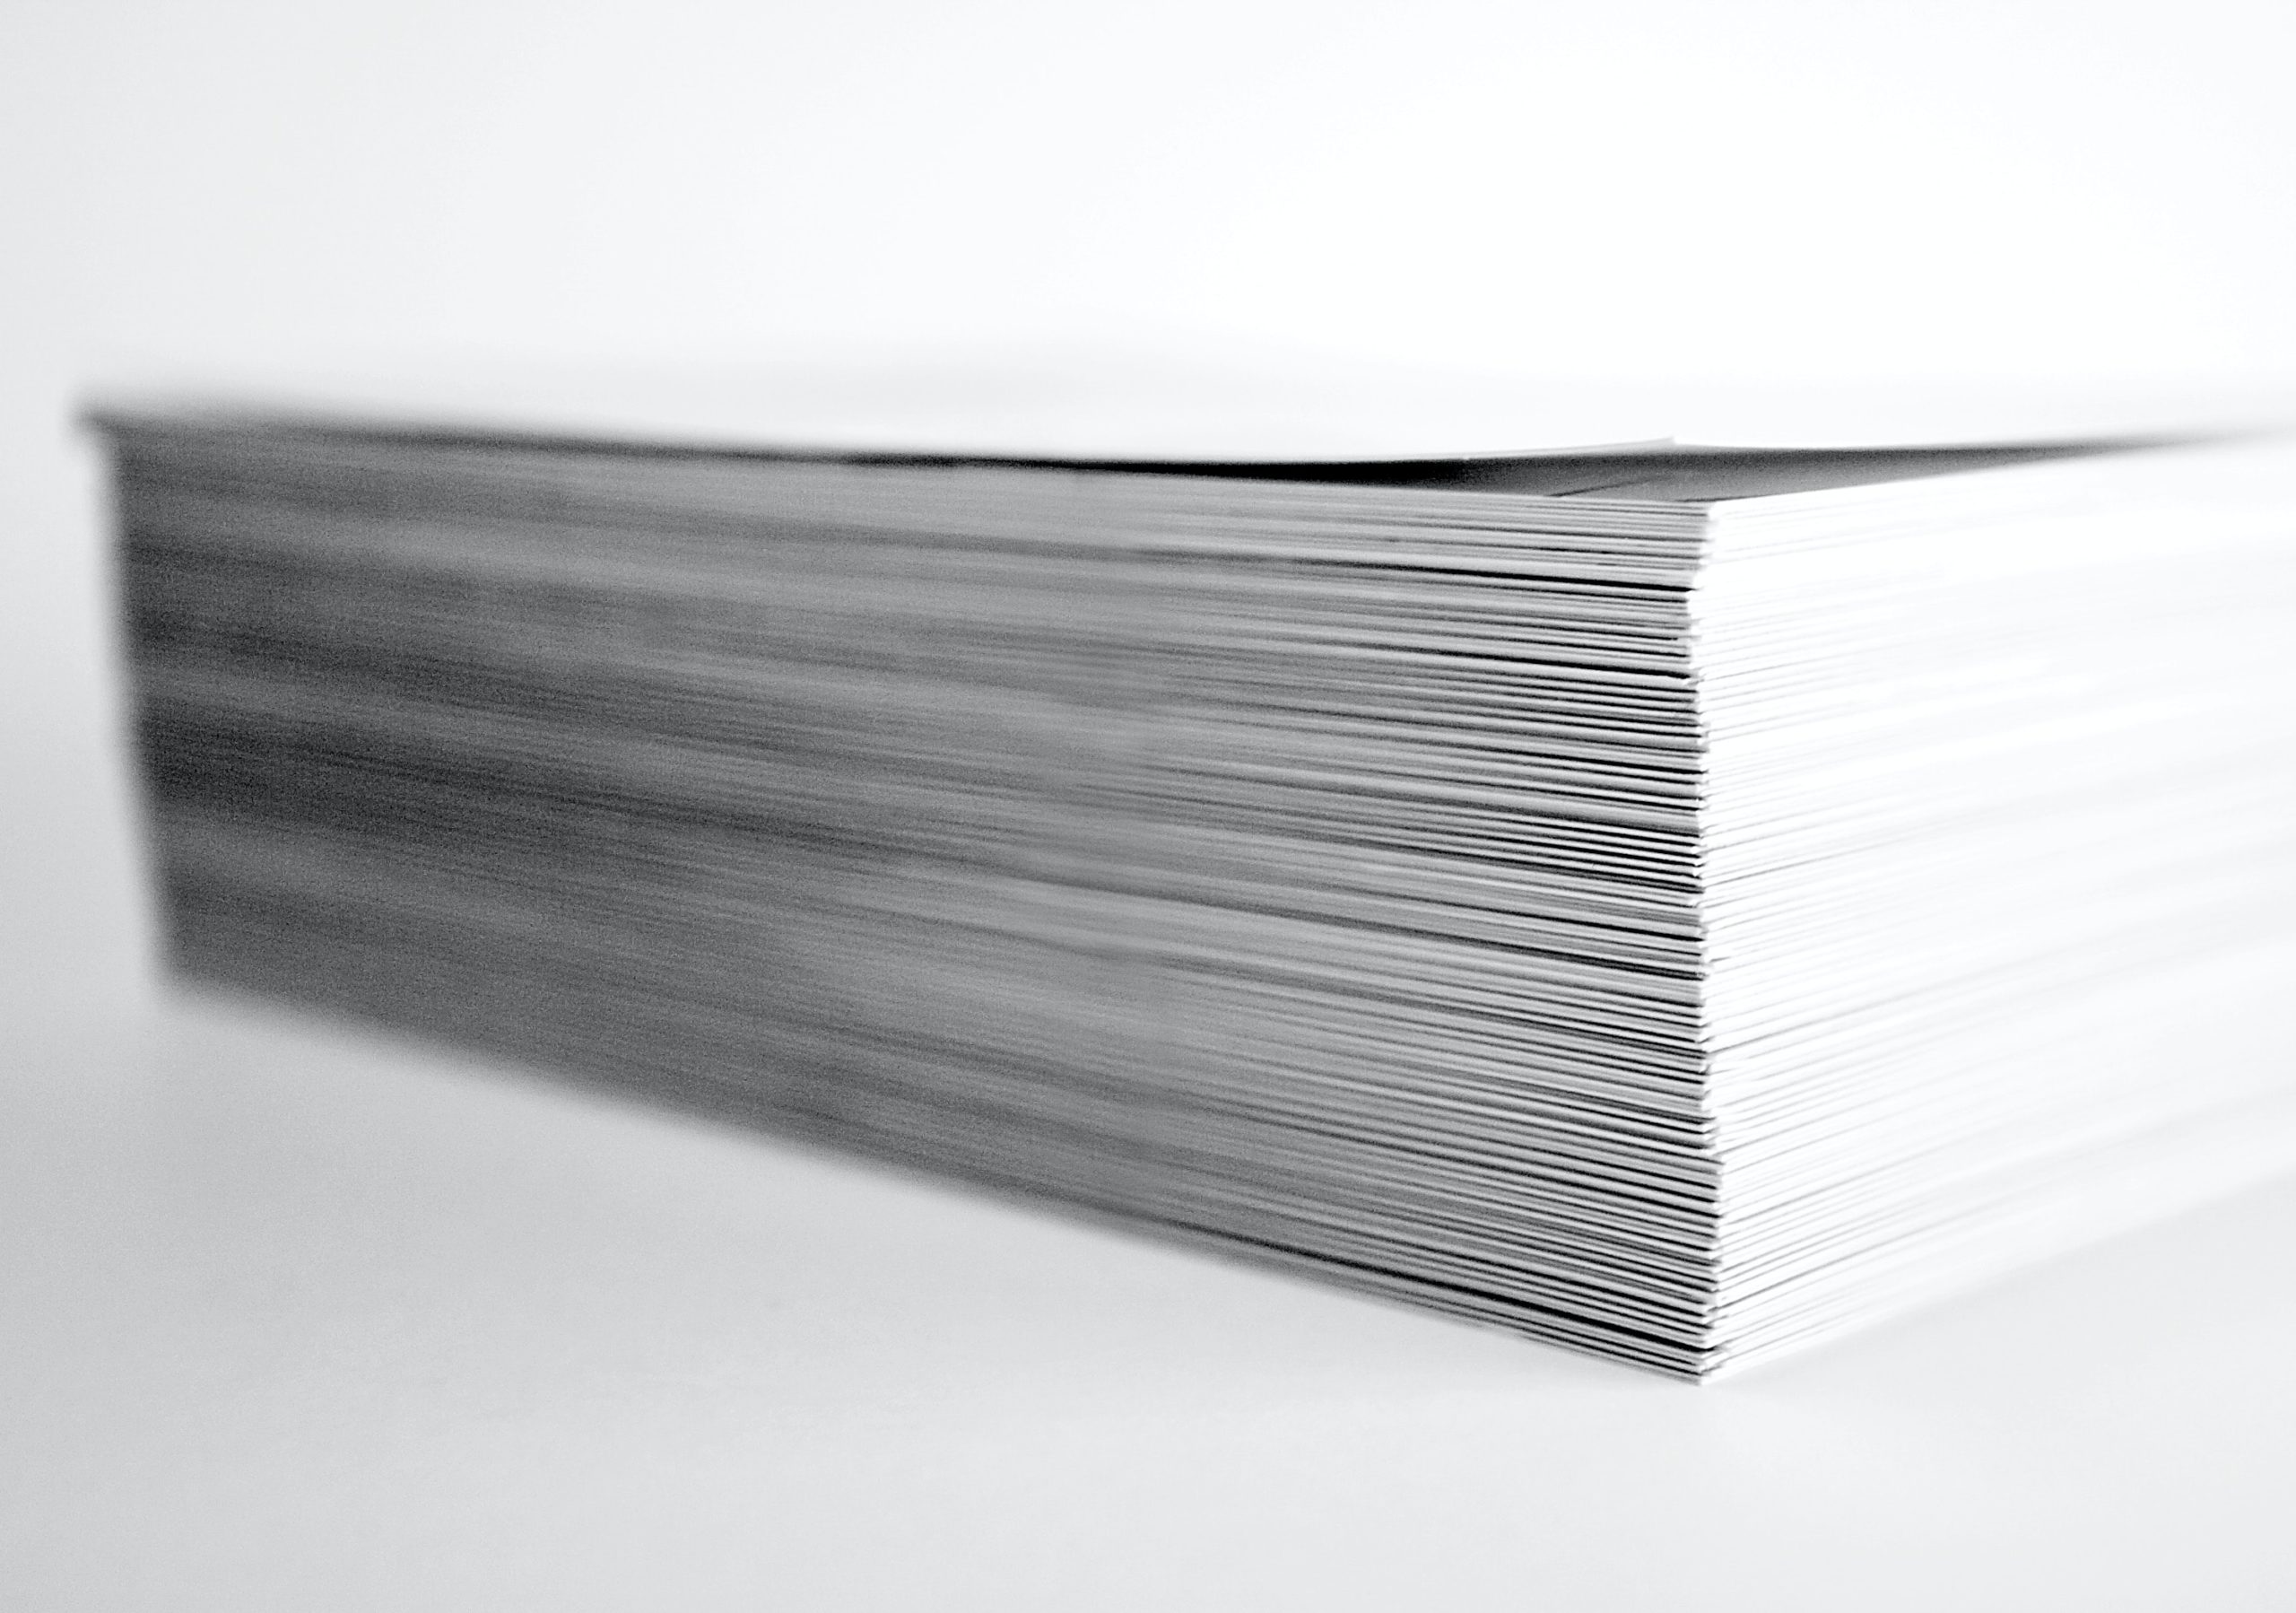 A pile of ACI papers are neatly organzed into one column against a white background.